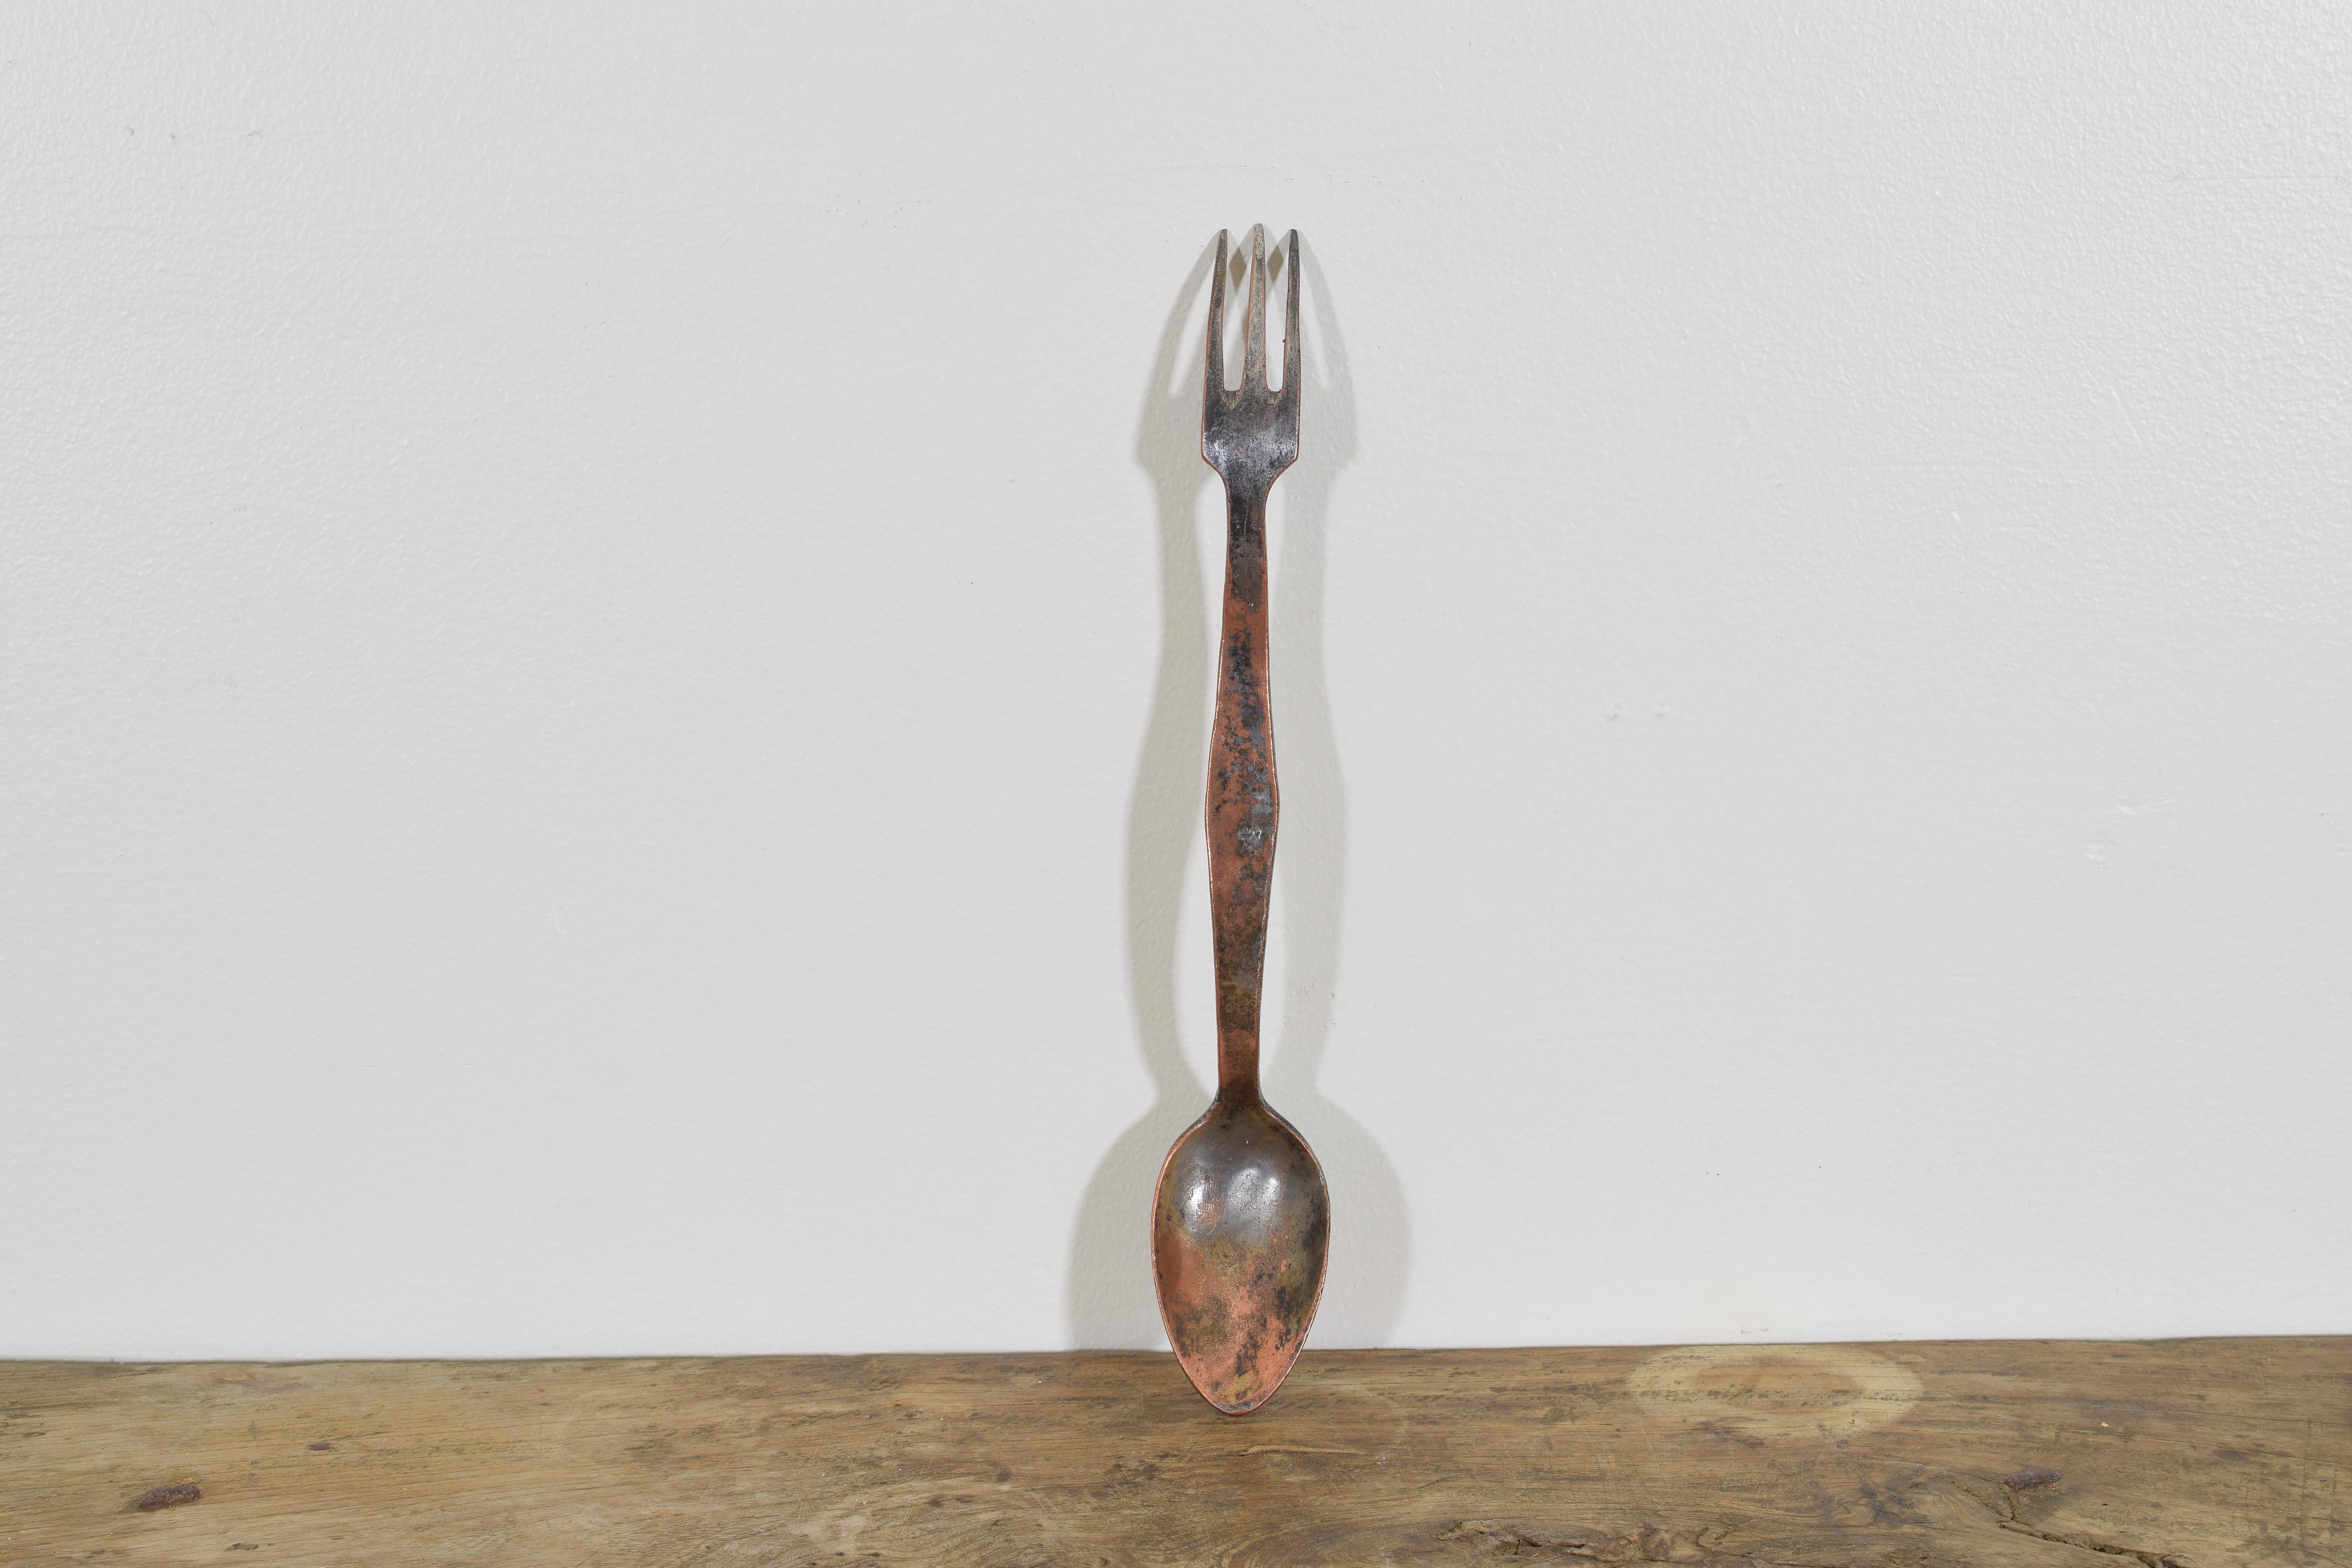 Who doesn't need a spork? this one happens to be finely made and from the 19th century. Enough said? we think so.